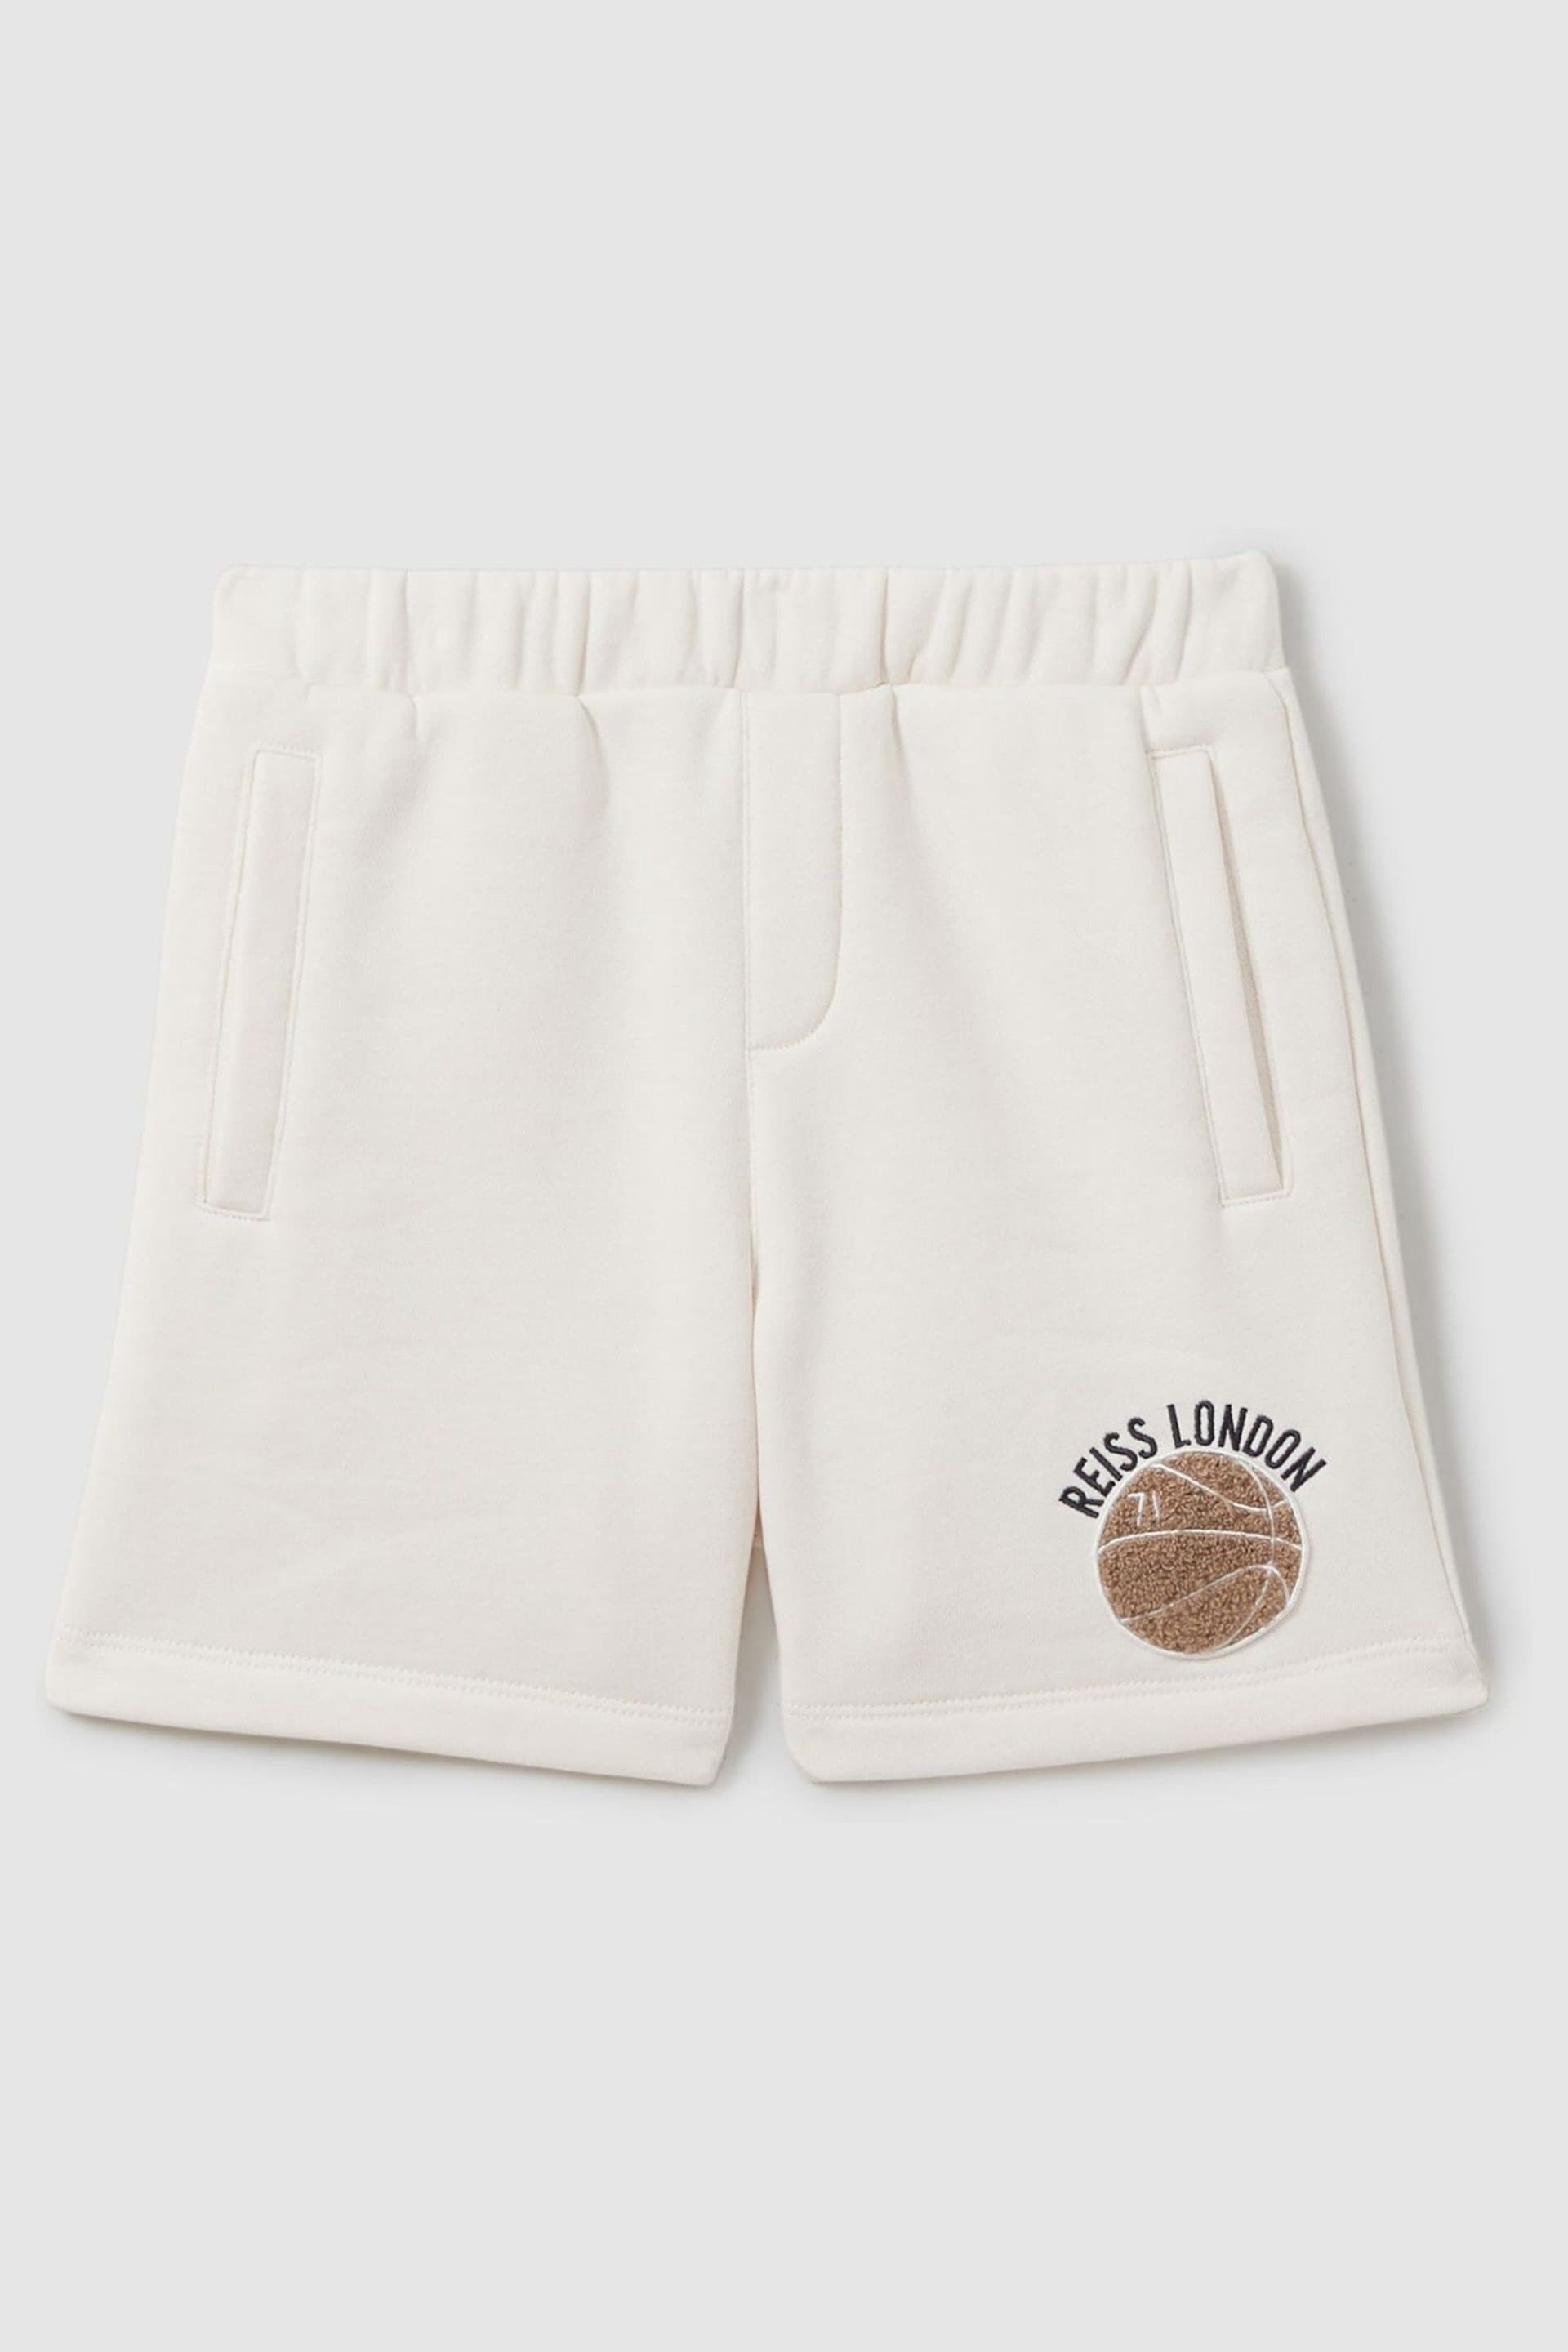 Reiss Off White Arto Junior Relaxed Embroidered Basketball Shorts - Image 2 of 2